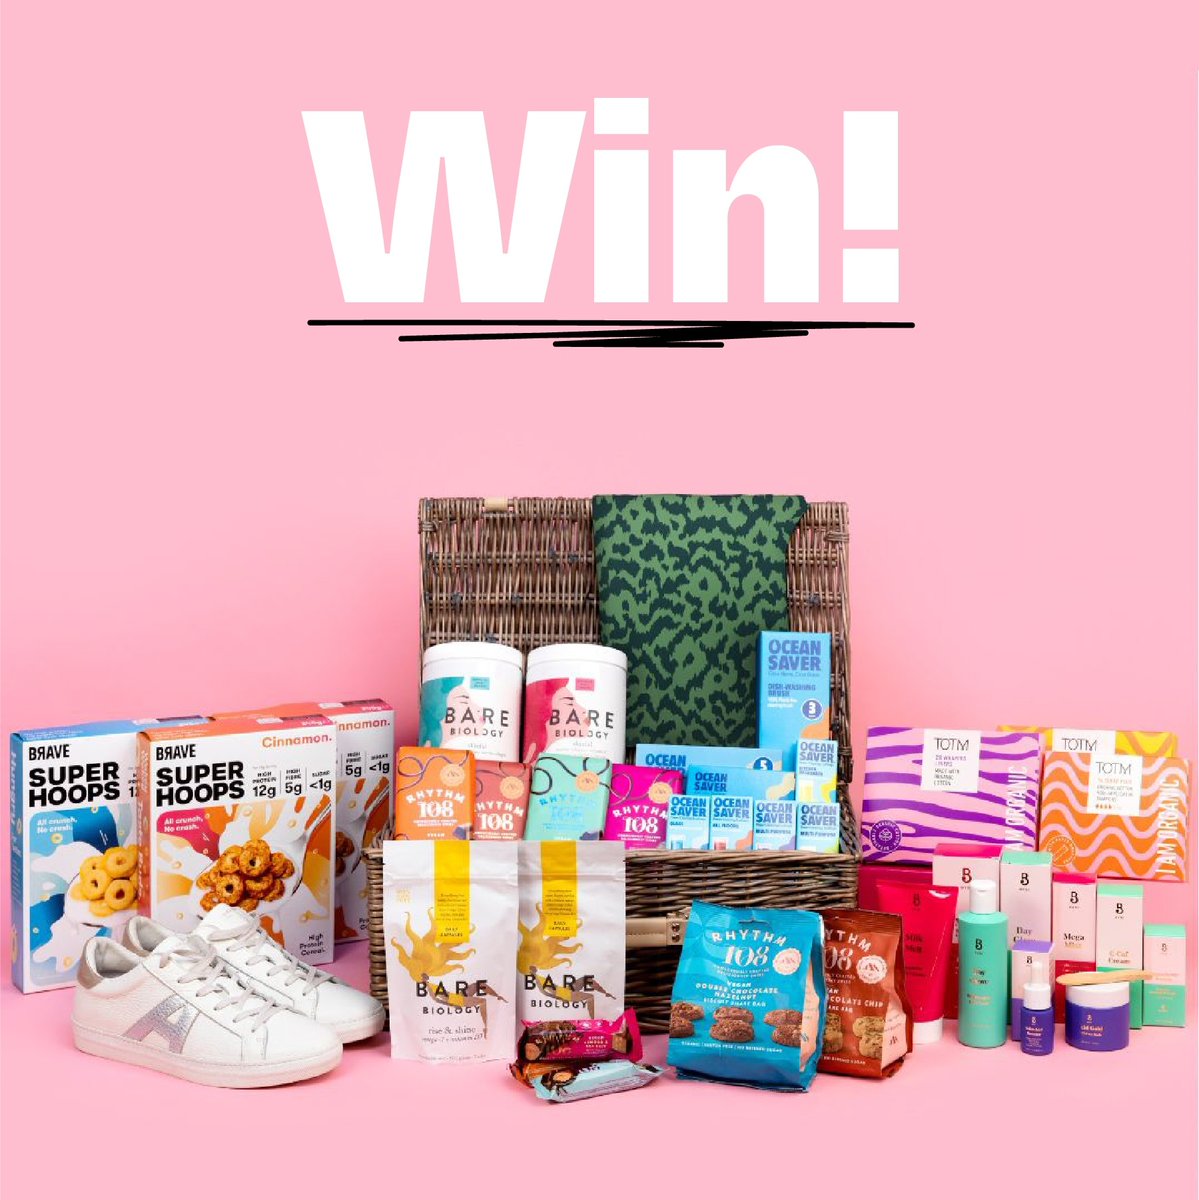 We've joined our favourite brands to give away £1.4k of prizes but there's only a few days left to enter⌛ Prizes from @AsquithLondon, @BybiBeauty, @OceanSaverDrops, @Rhythm108, @Airandgrace, @totmorganic, @barebiology & us! Enter here: woobox.com/7n7i9f